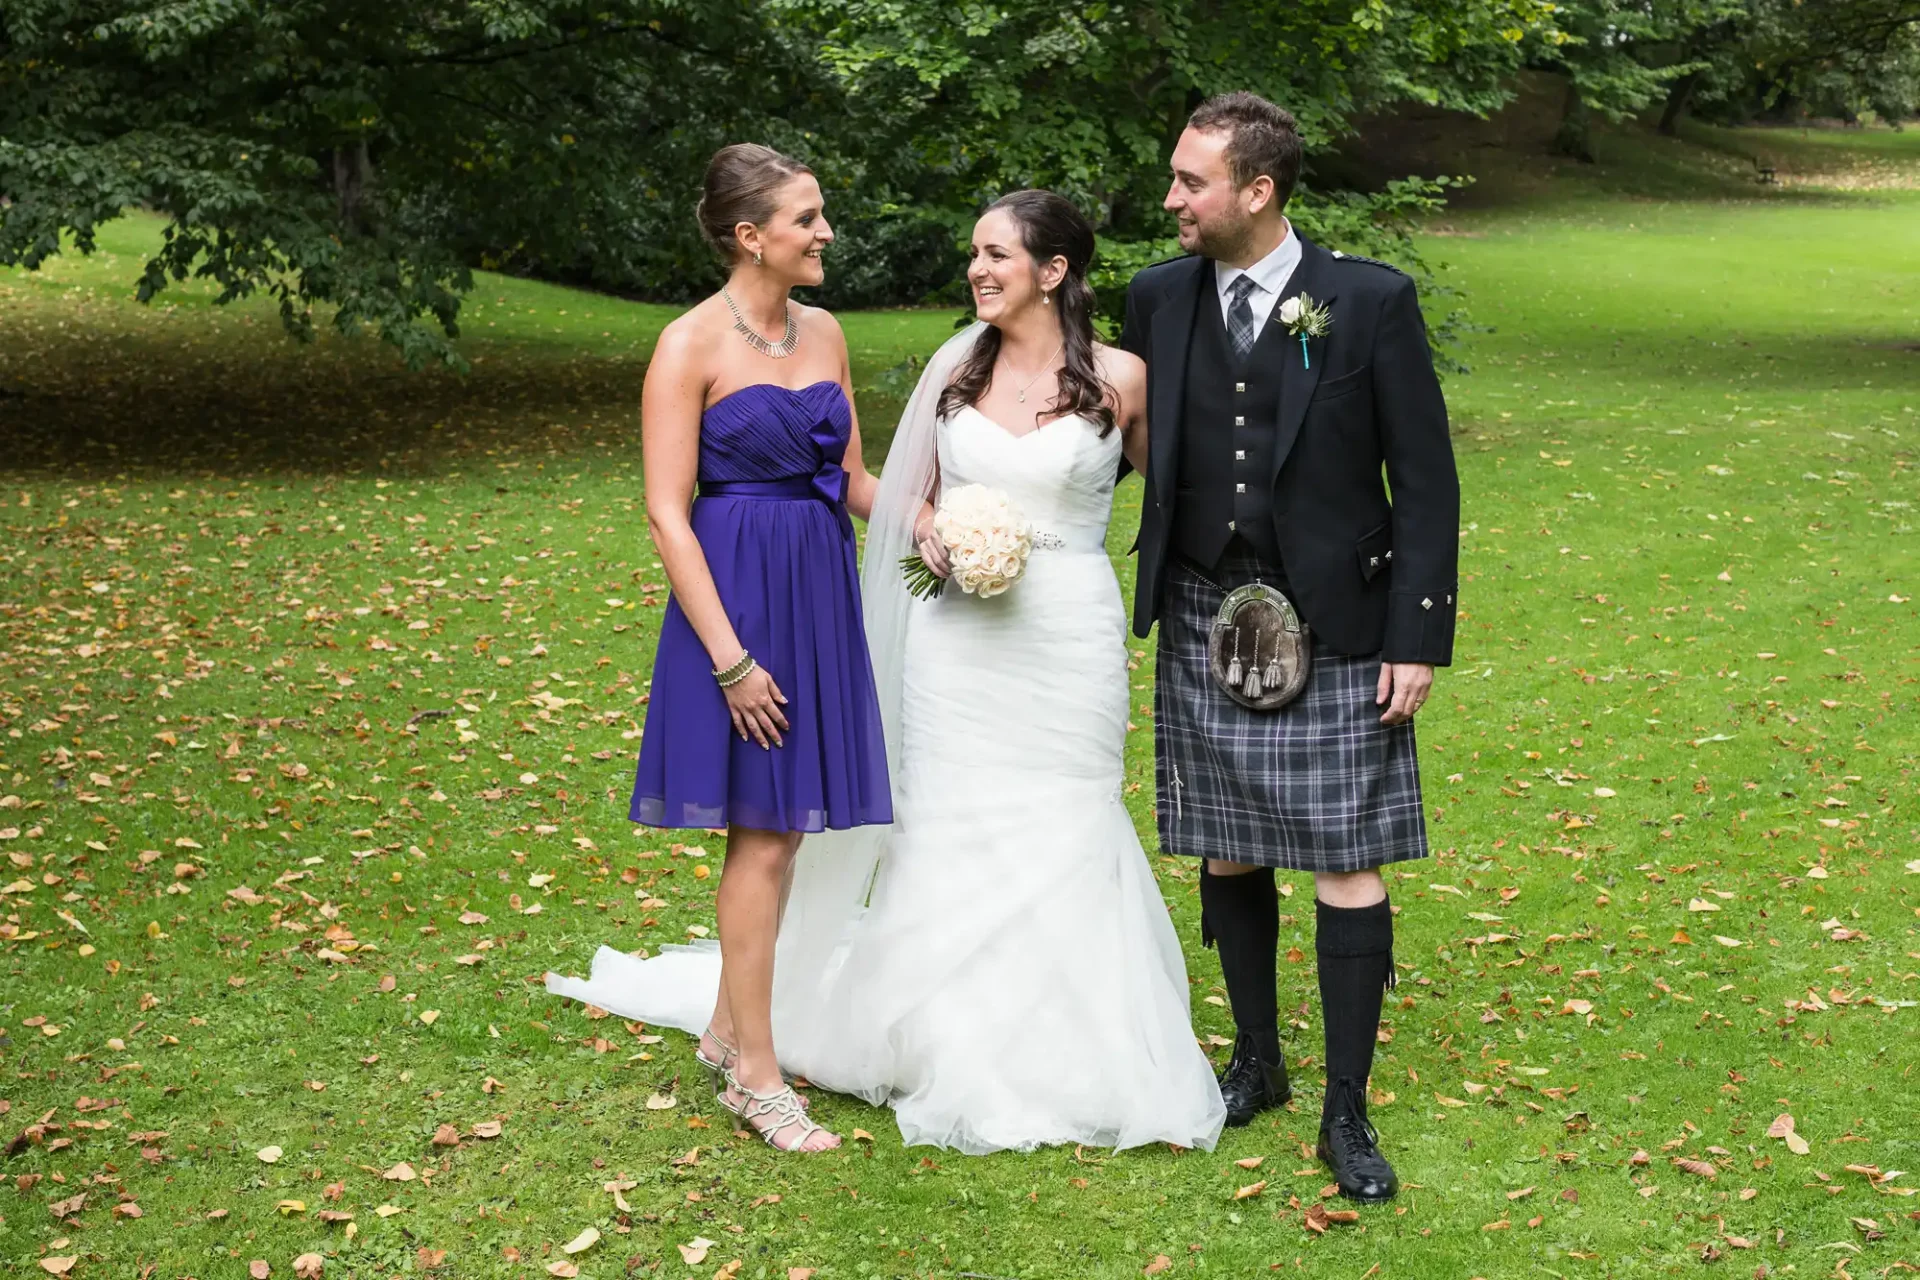 A bride in a white gown and a groom in a kilt stand with a bridesmaid in a purple dress, all smiling in a park with green trees.